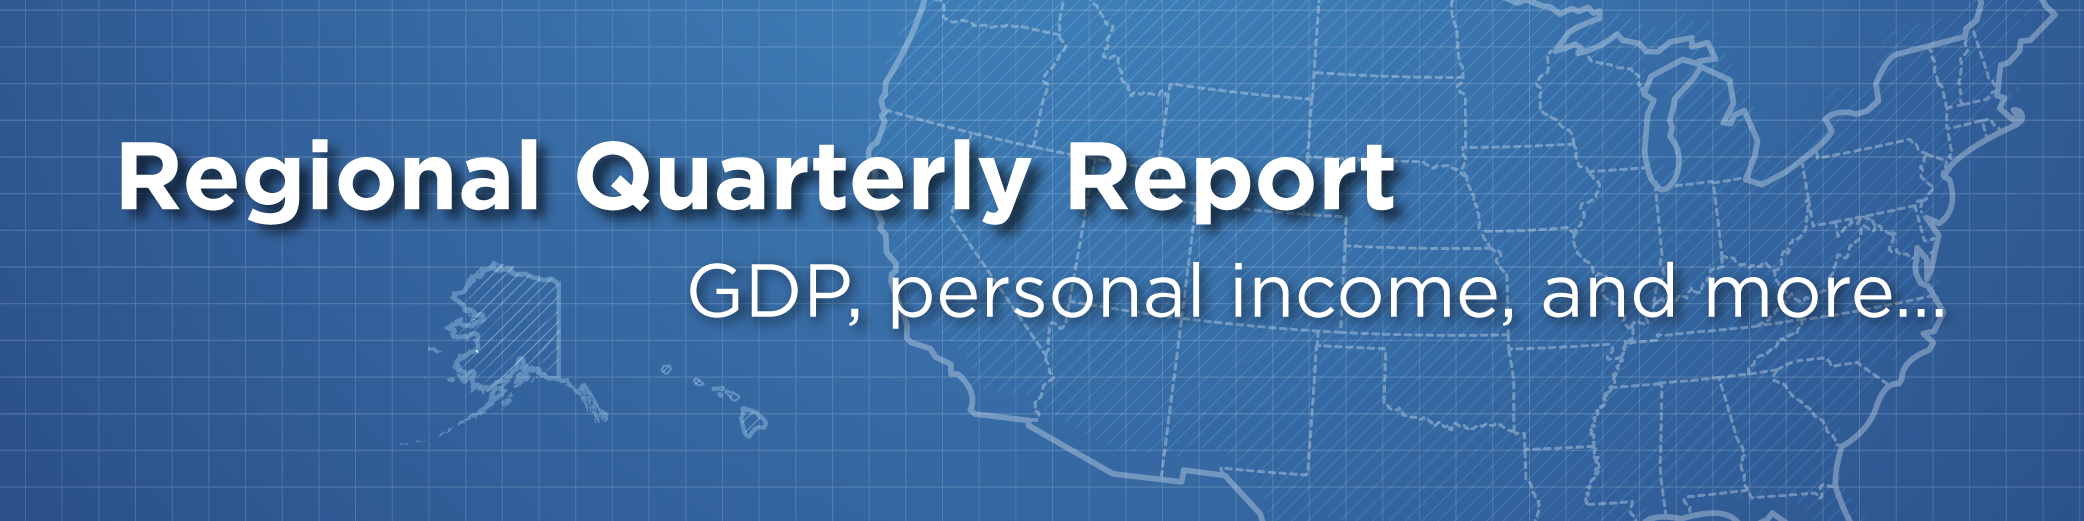 Regional Quarterly Report: GDP, personal income, and more.